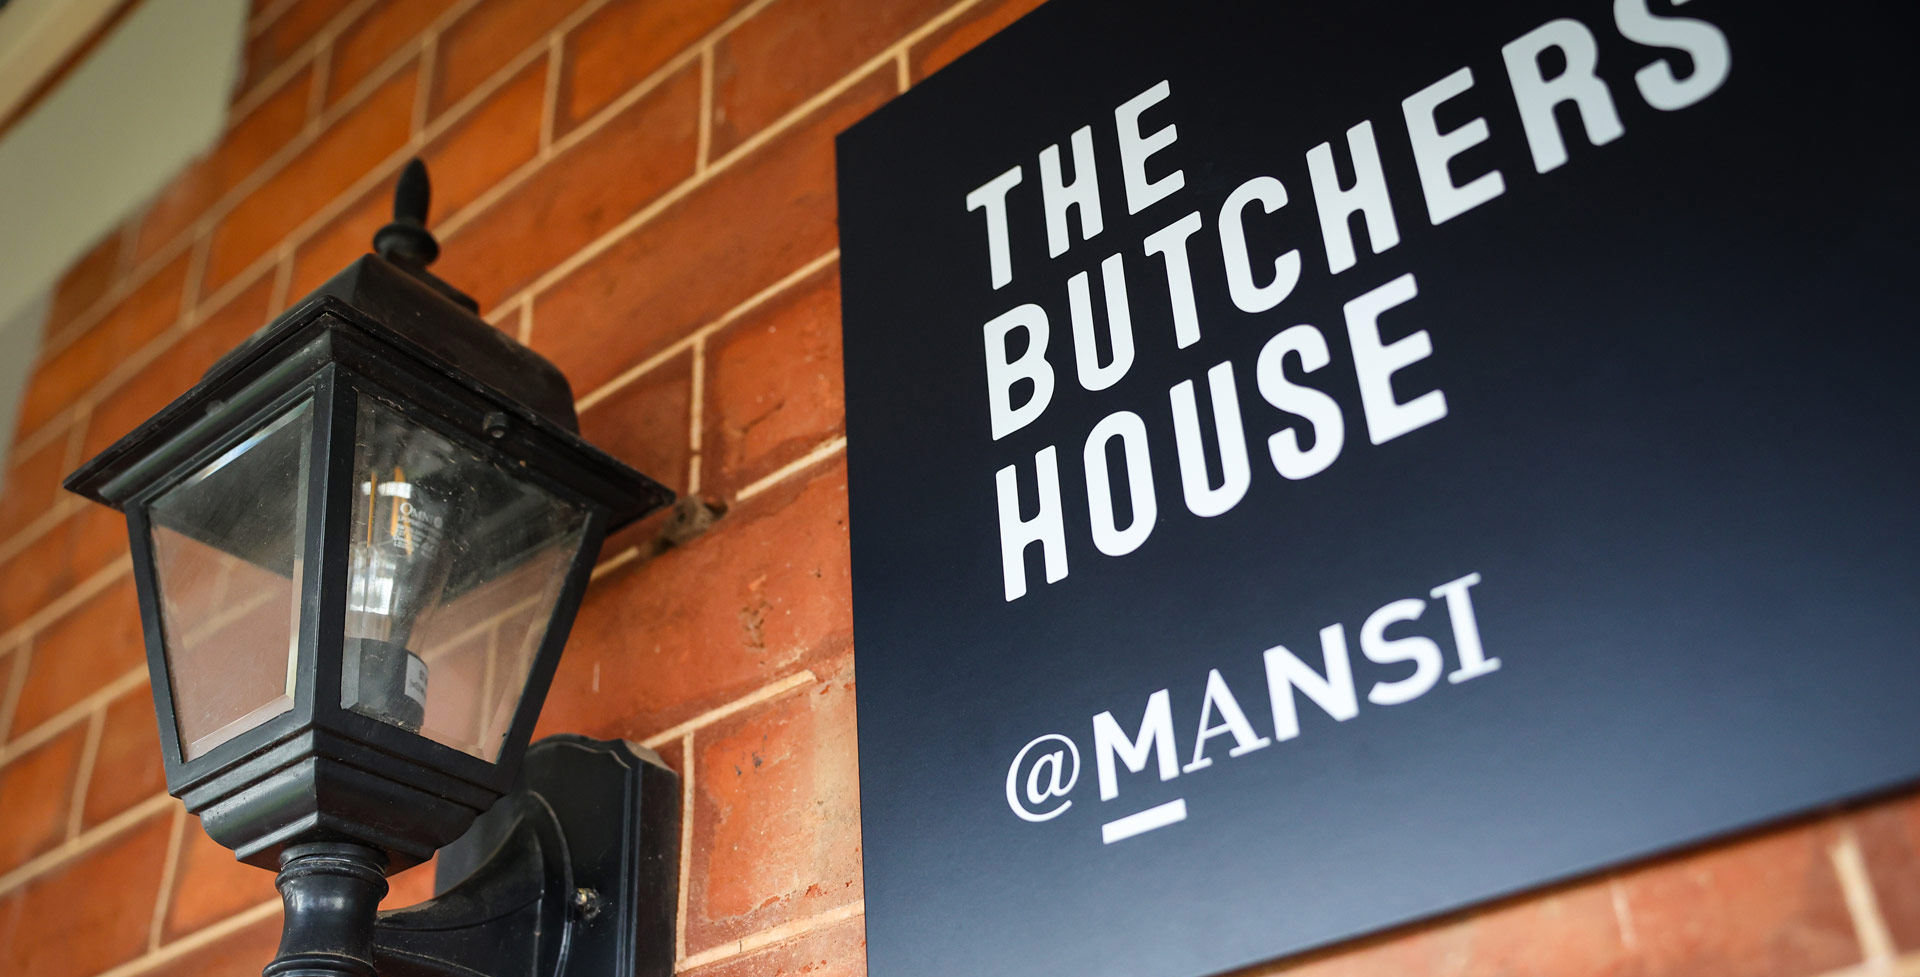 The Butcher’s House At Mansi